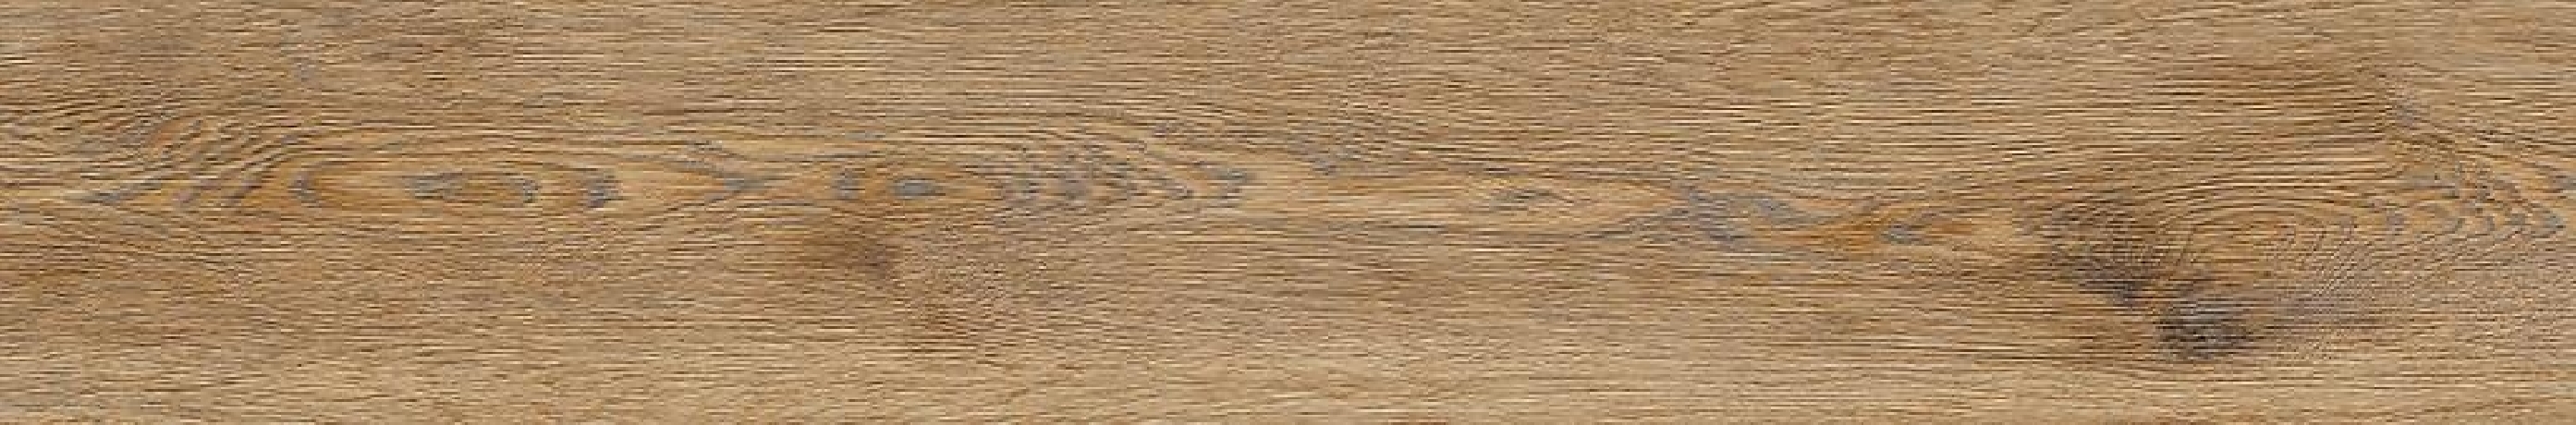 Opoczno Grand Wood Rustic Chocolate OP498-002-1